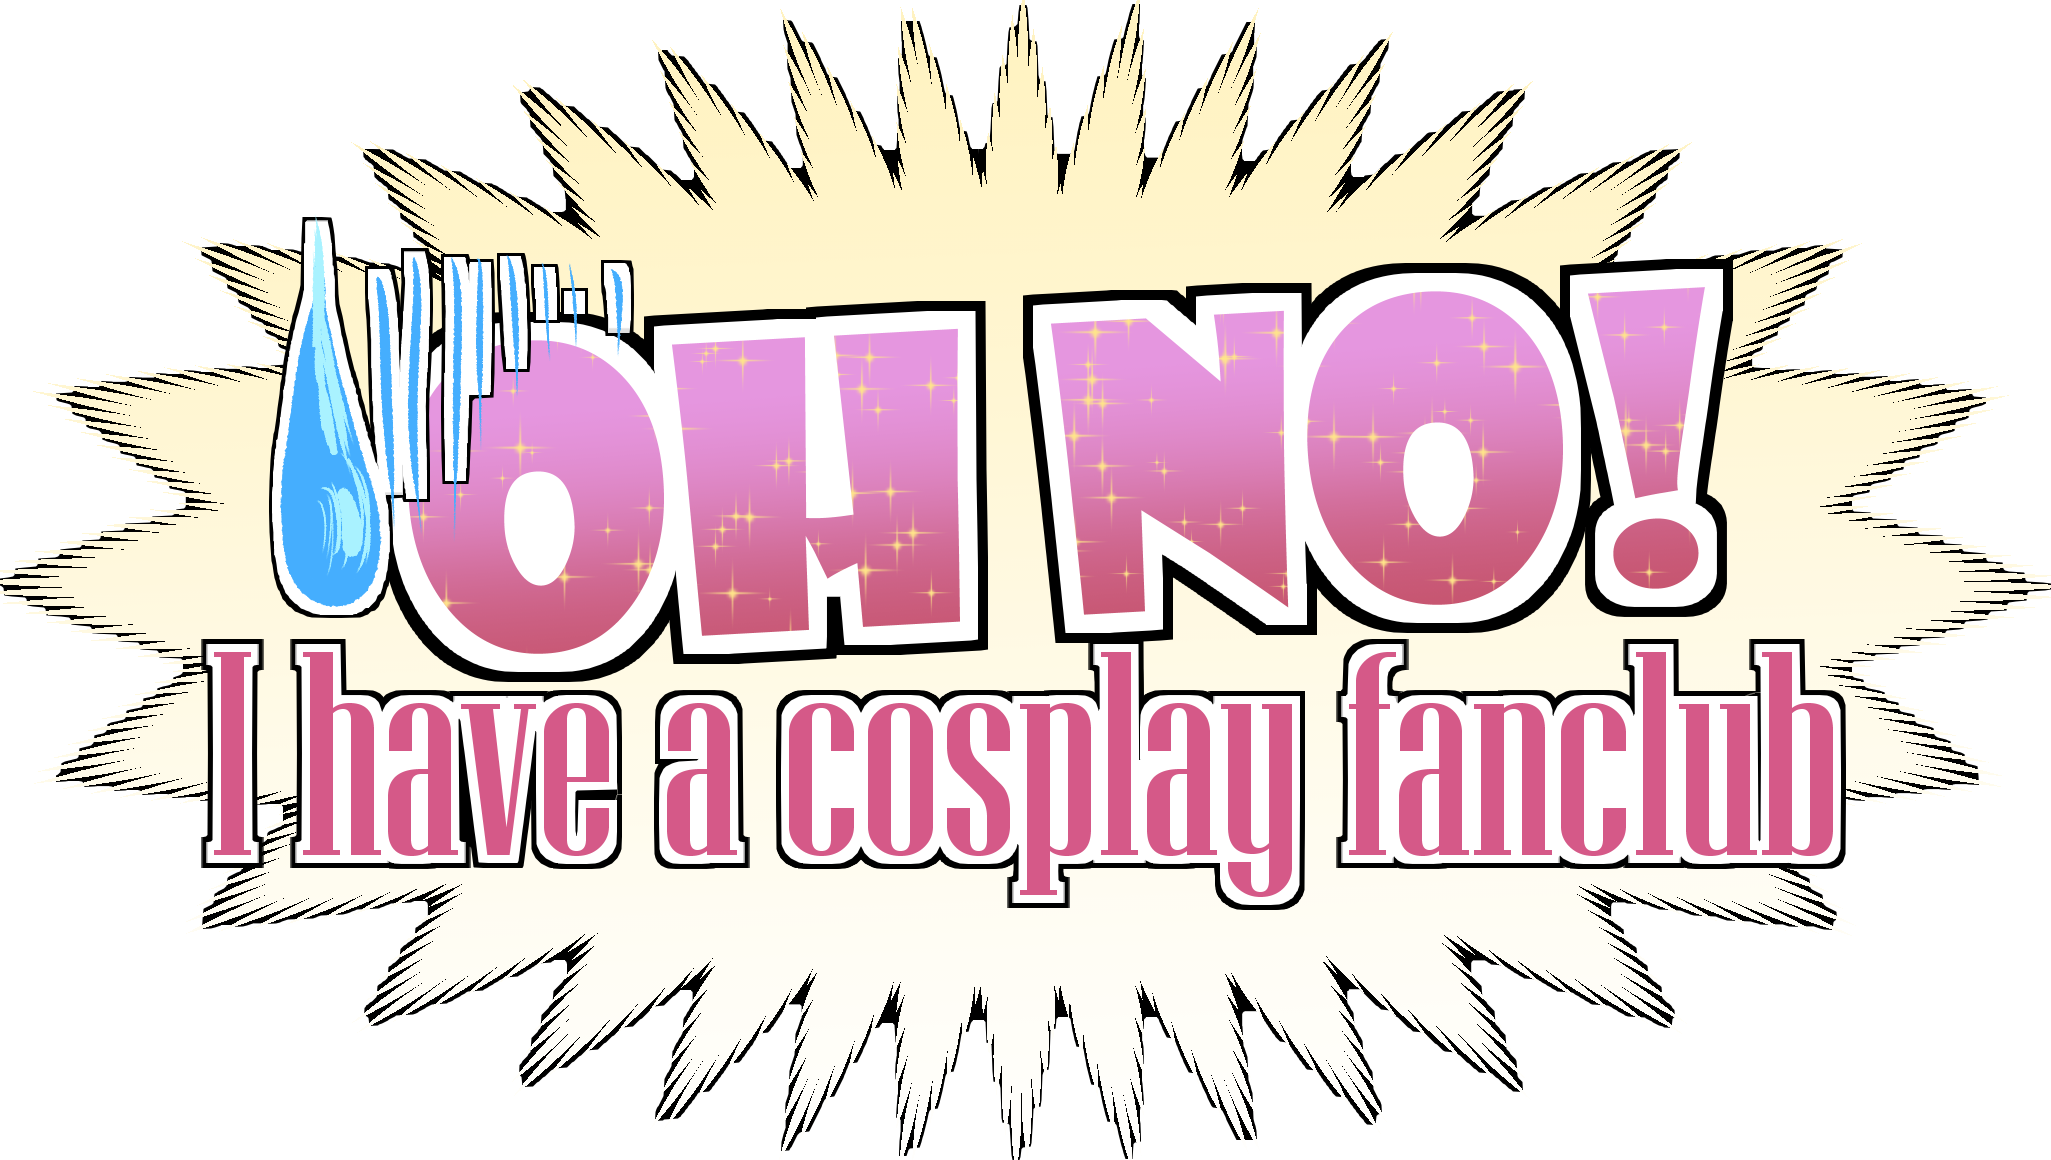 Oh no! I have a cosplay fanclub [DEMO]